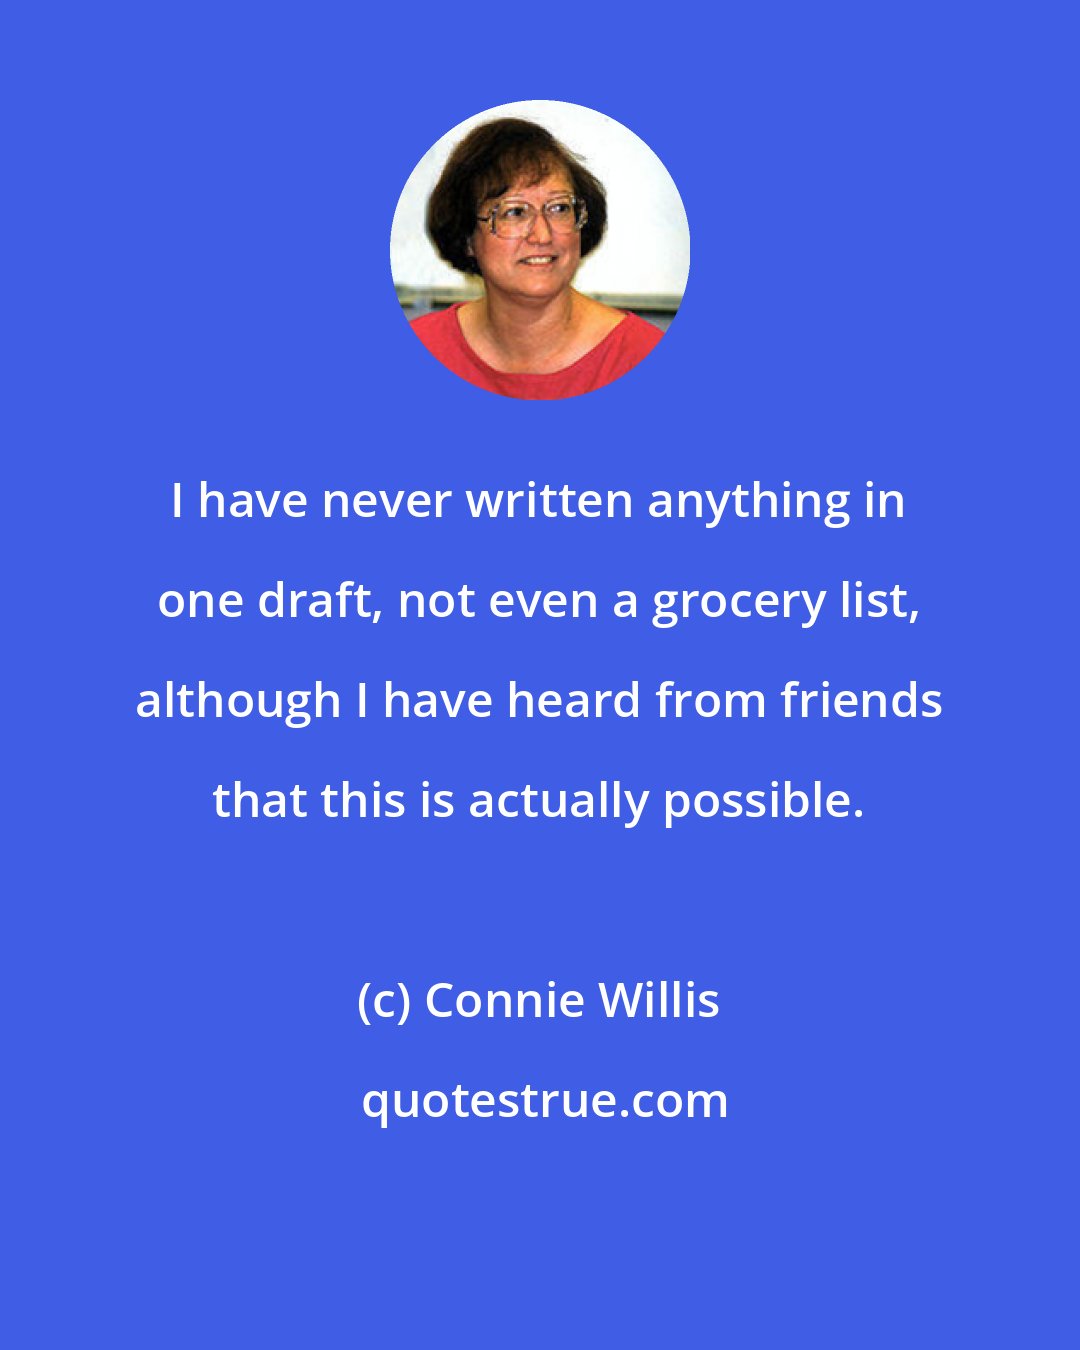 Connie Willis: I have never written anything in one draft, not even a grocery list, although I have heard from friends that this is actually possible.